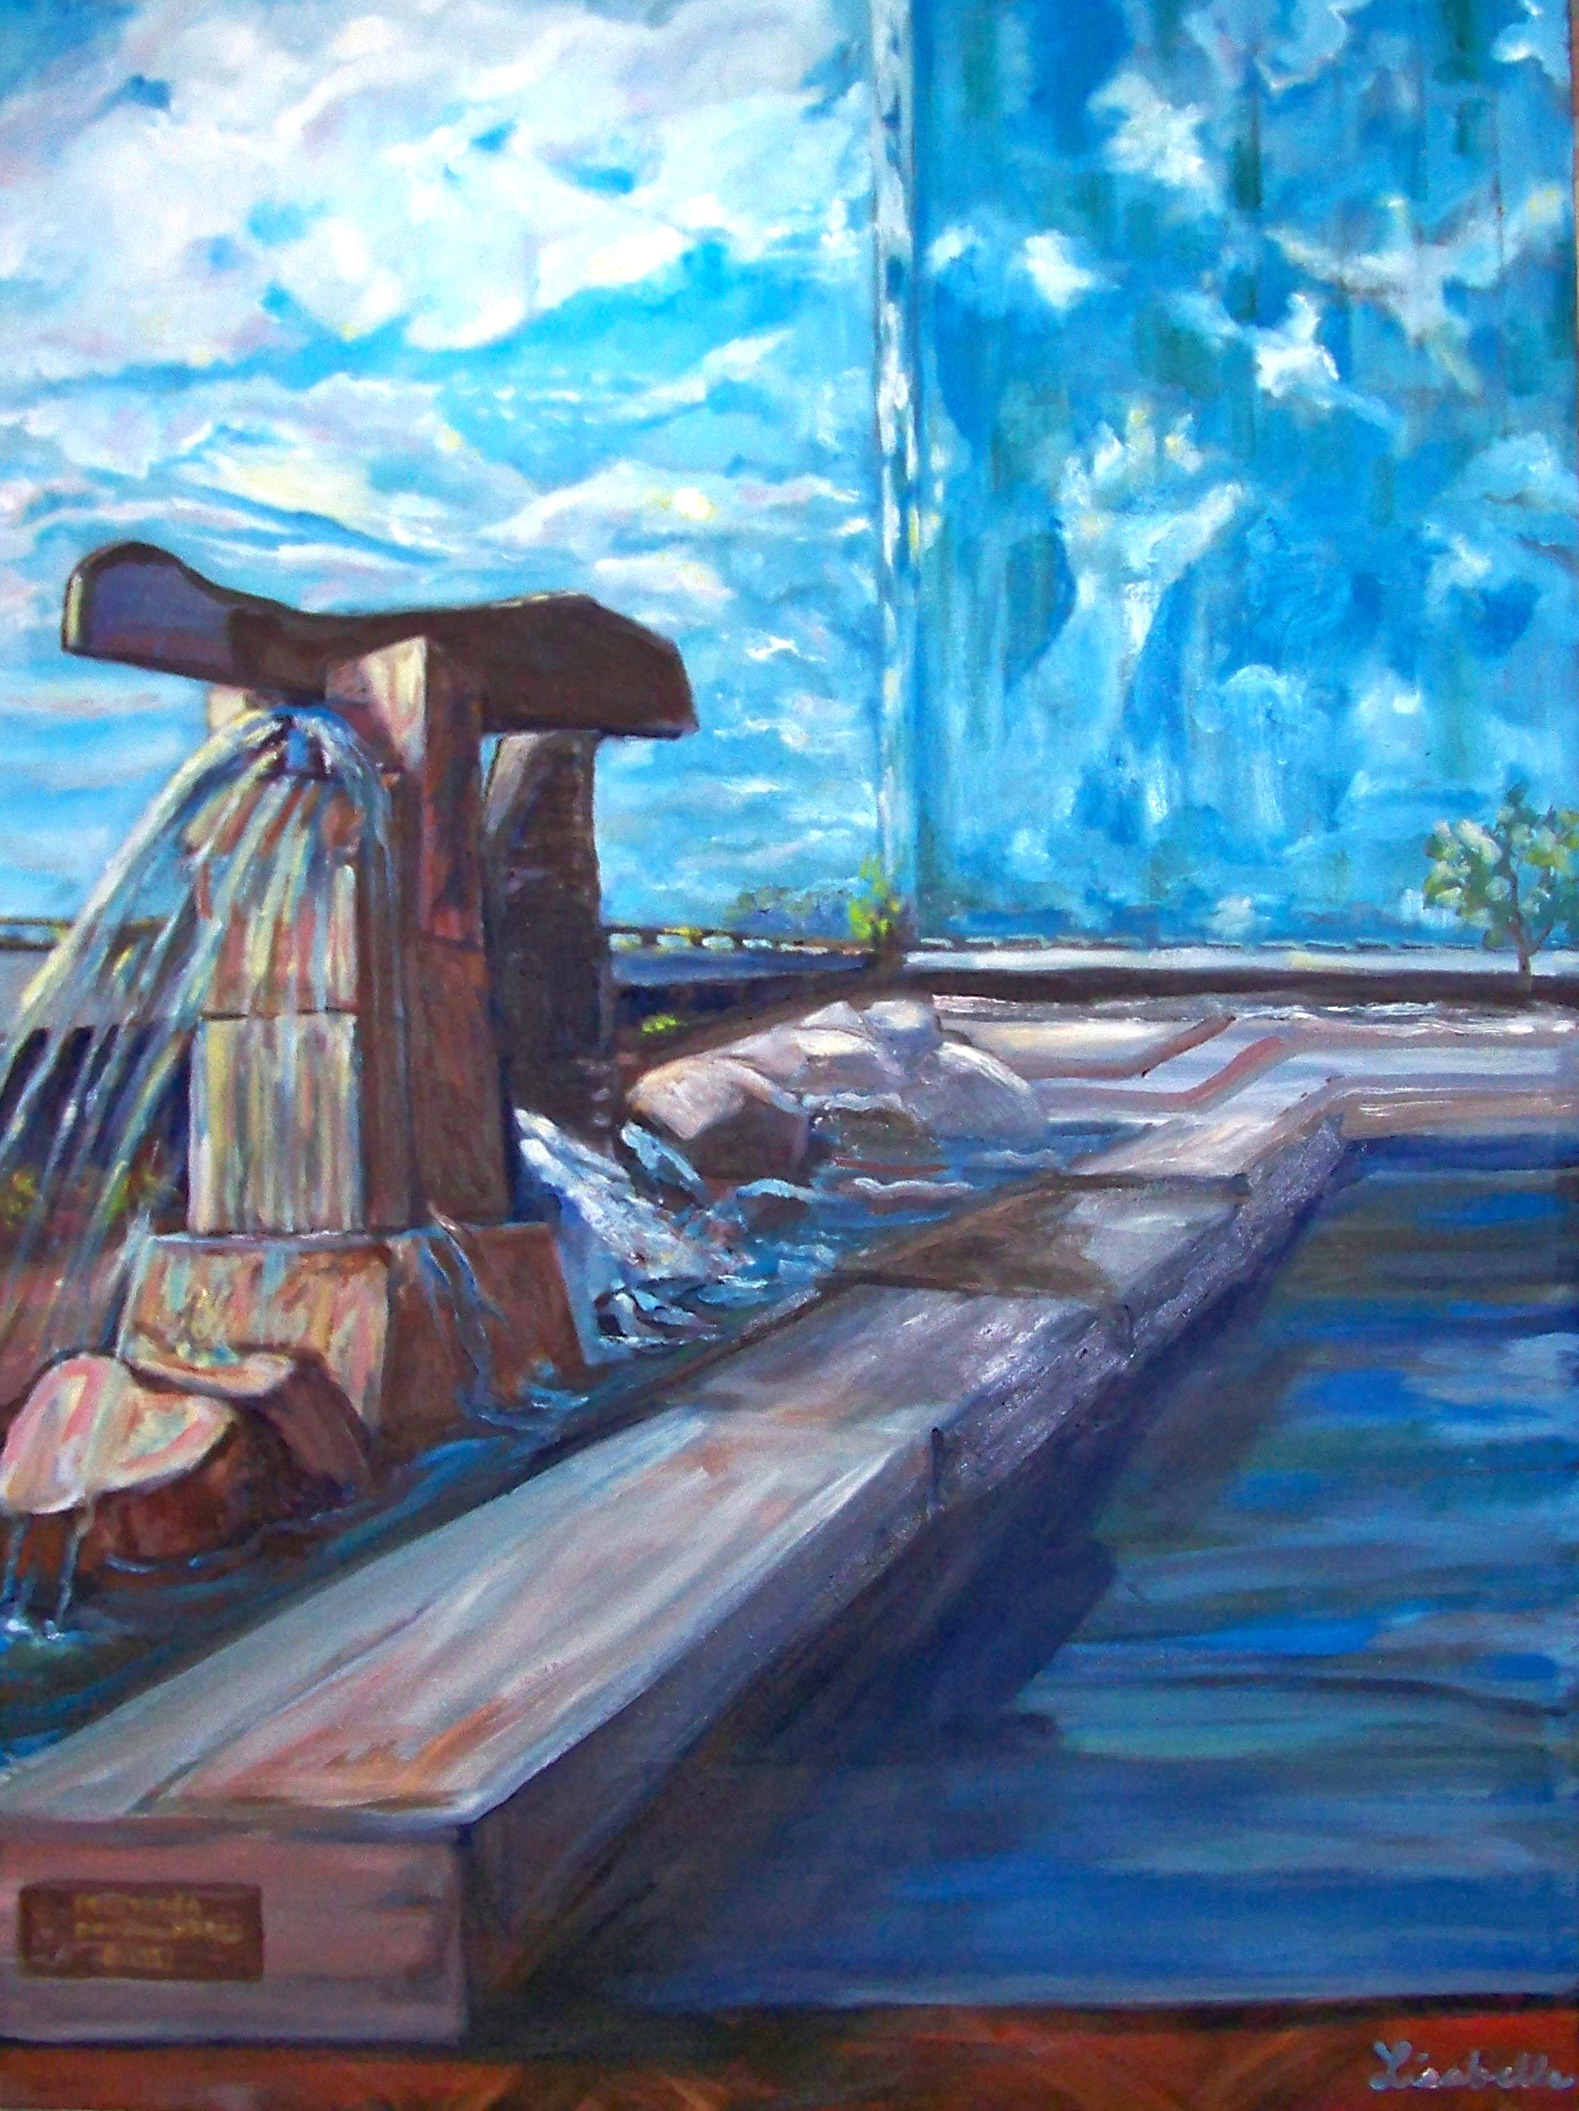 Toledo, Ohio,  53rd Bank, Reflecting pool, Sculpture art Toledo, OH, Surrealism,  Oil painting by Lisabelle 2008, 36 x 48" , Surrealistic Painting by Lisabelle, PEACEFUL REFLECTIONS